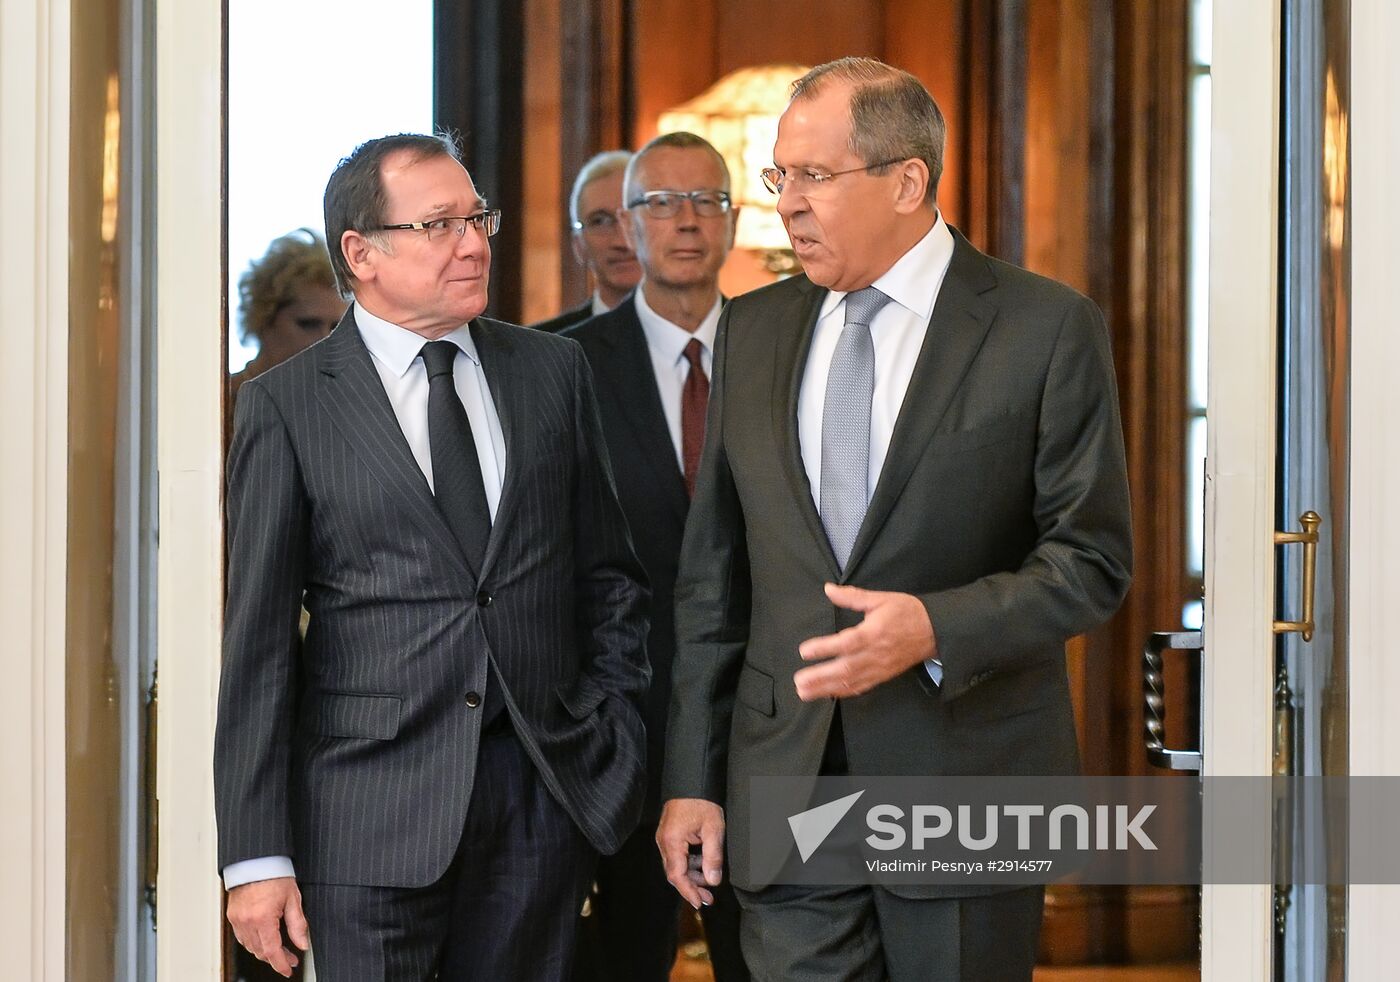 Foreign Minister Sergei Lavrov meets with Foreign Minister of New Zealand Murray McCully